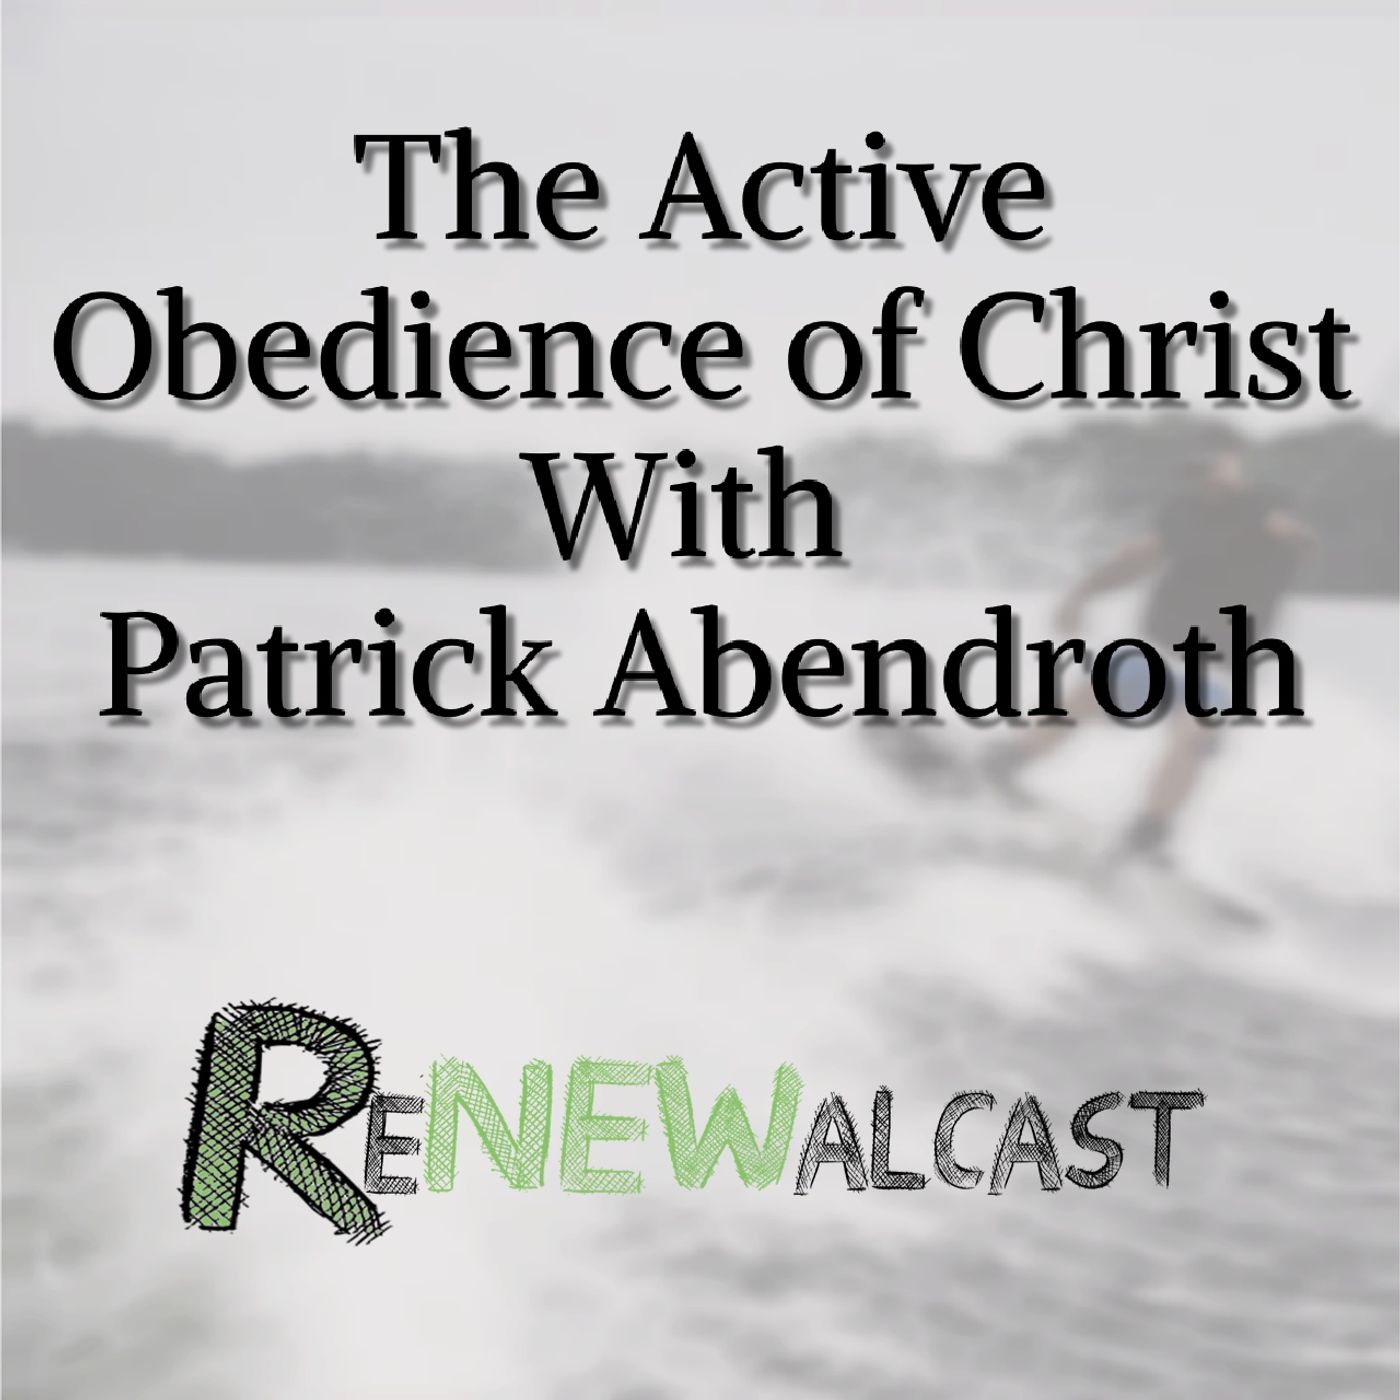 The Active Obedience of Christ With Patrick Abendroth